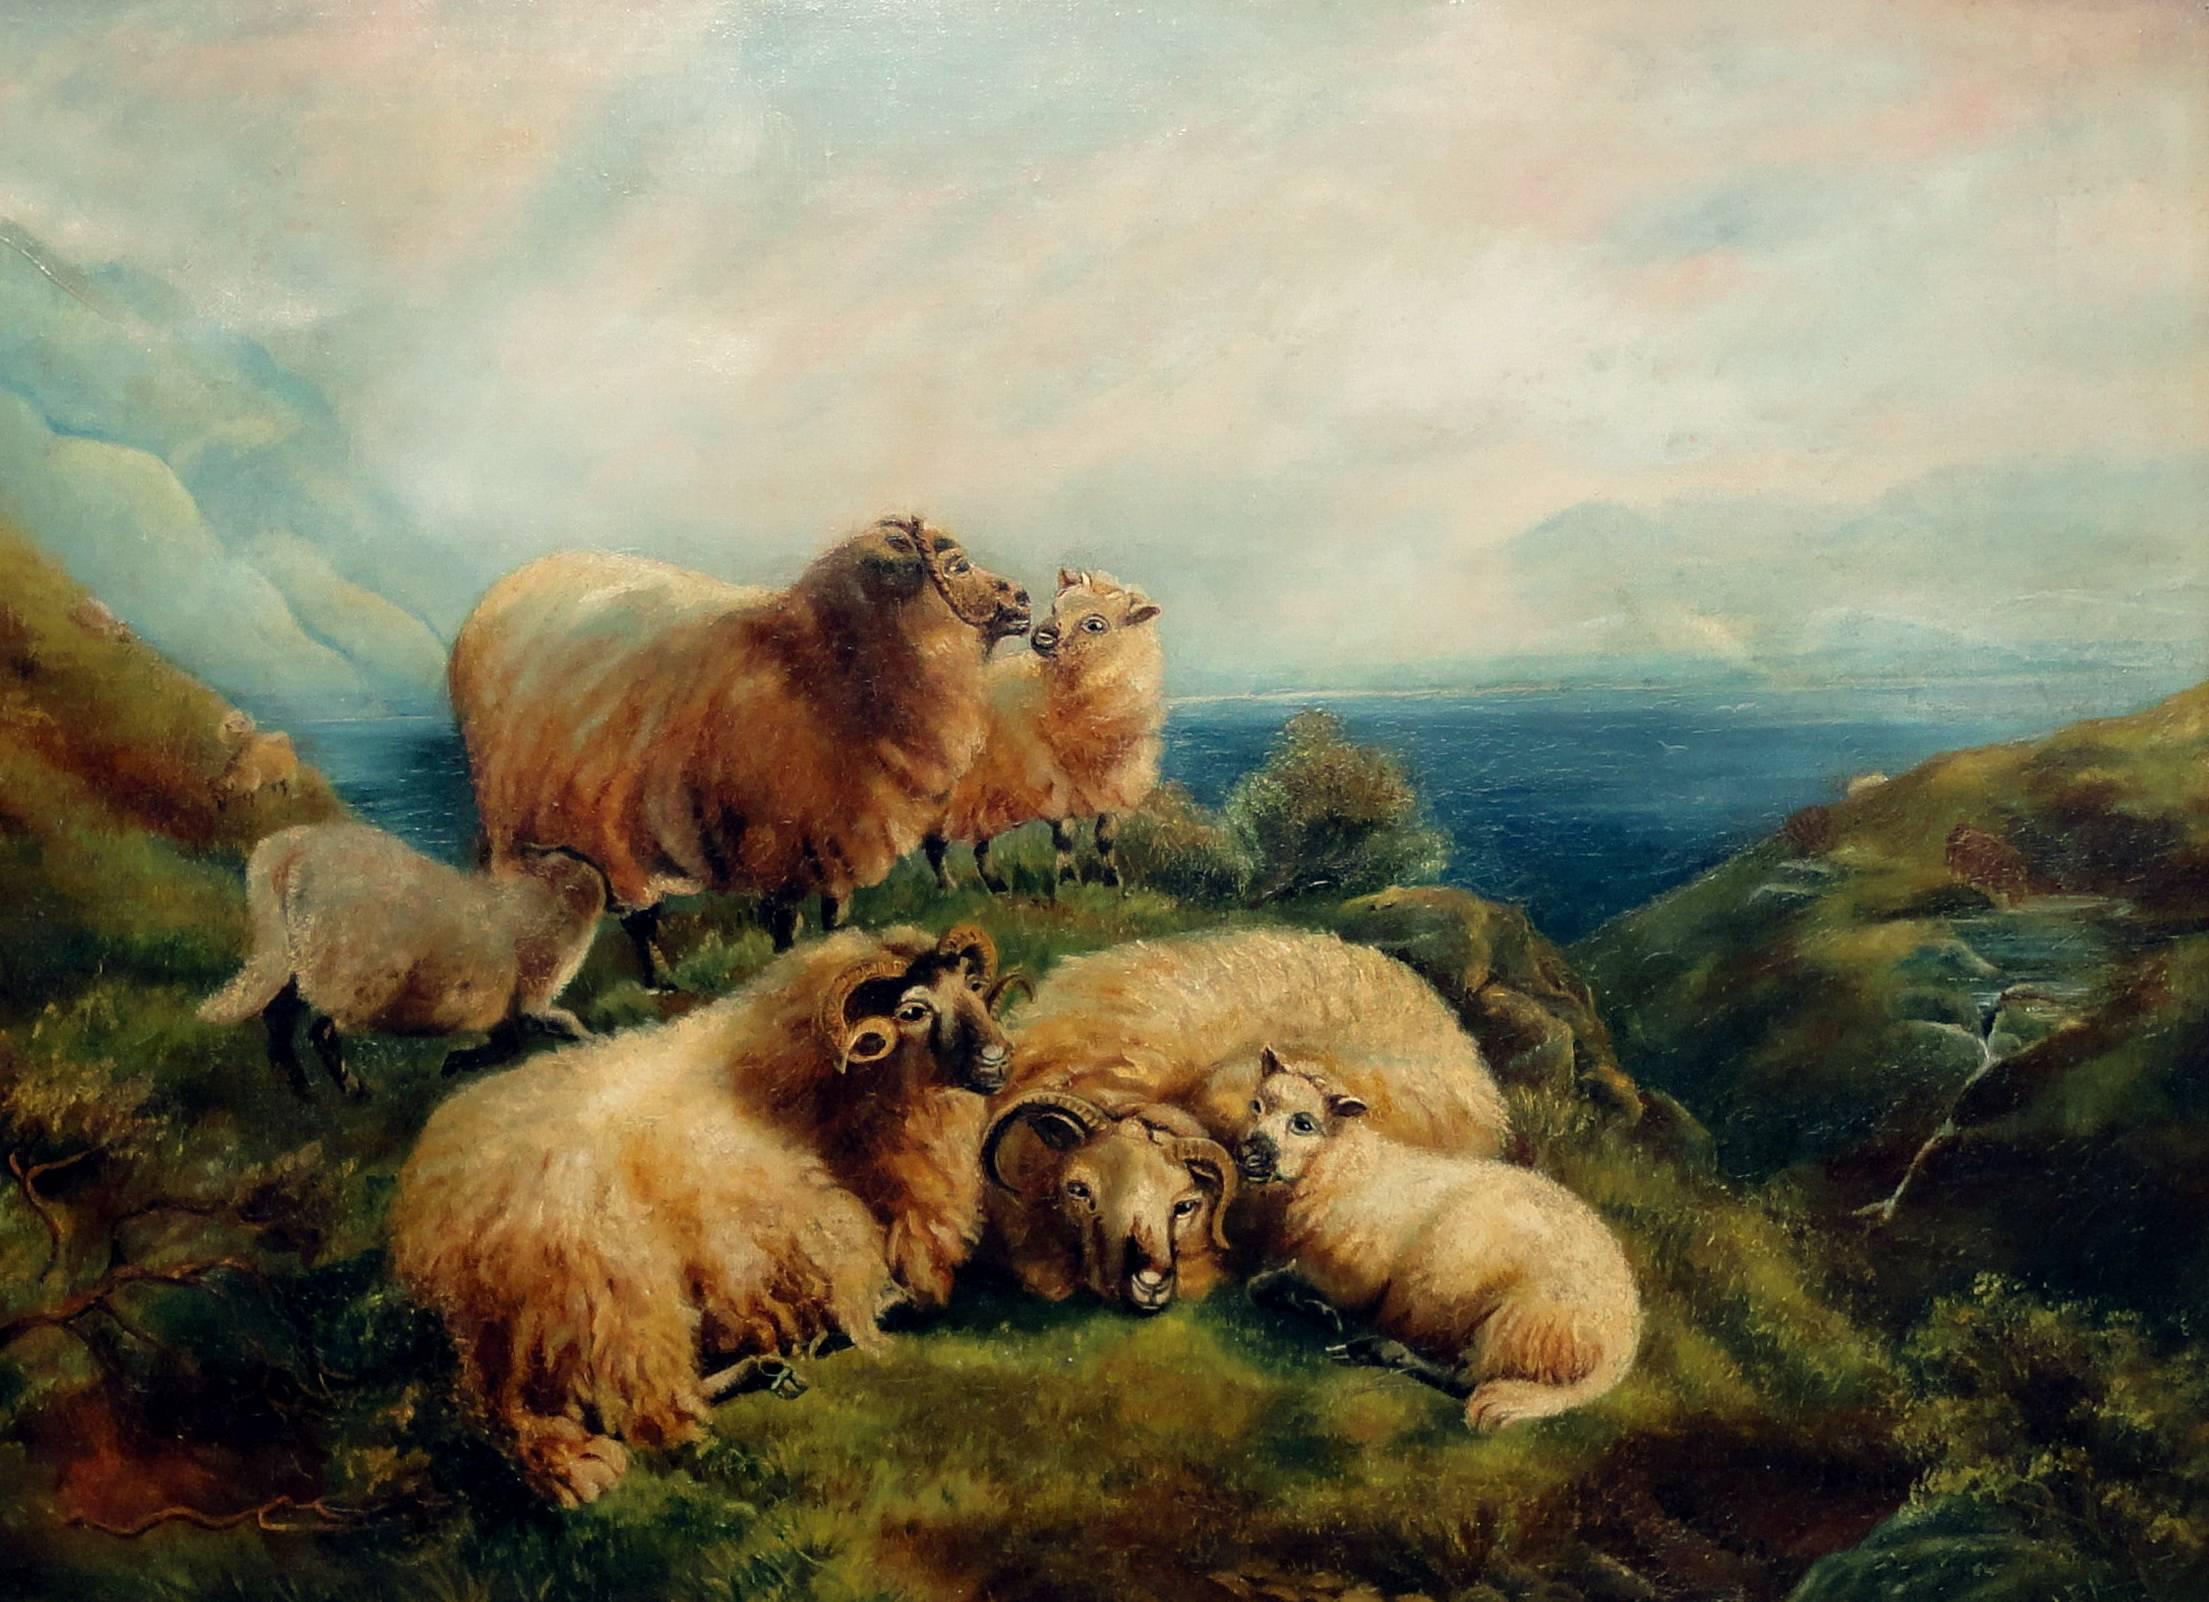 Sydney Yates Johnson was a popular British artist who painted towards the end of the 19th Century. Johnson preferred to paint outdoors and favored the natural light of Highland Scotland where he spent much of his time. This signed oil on canvas is a